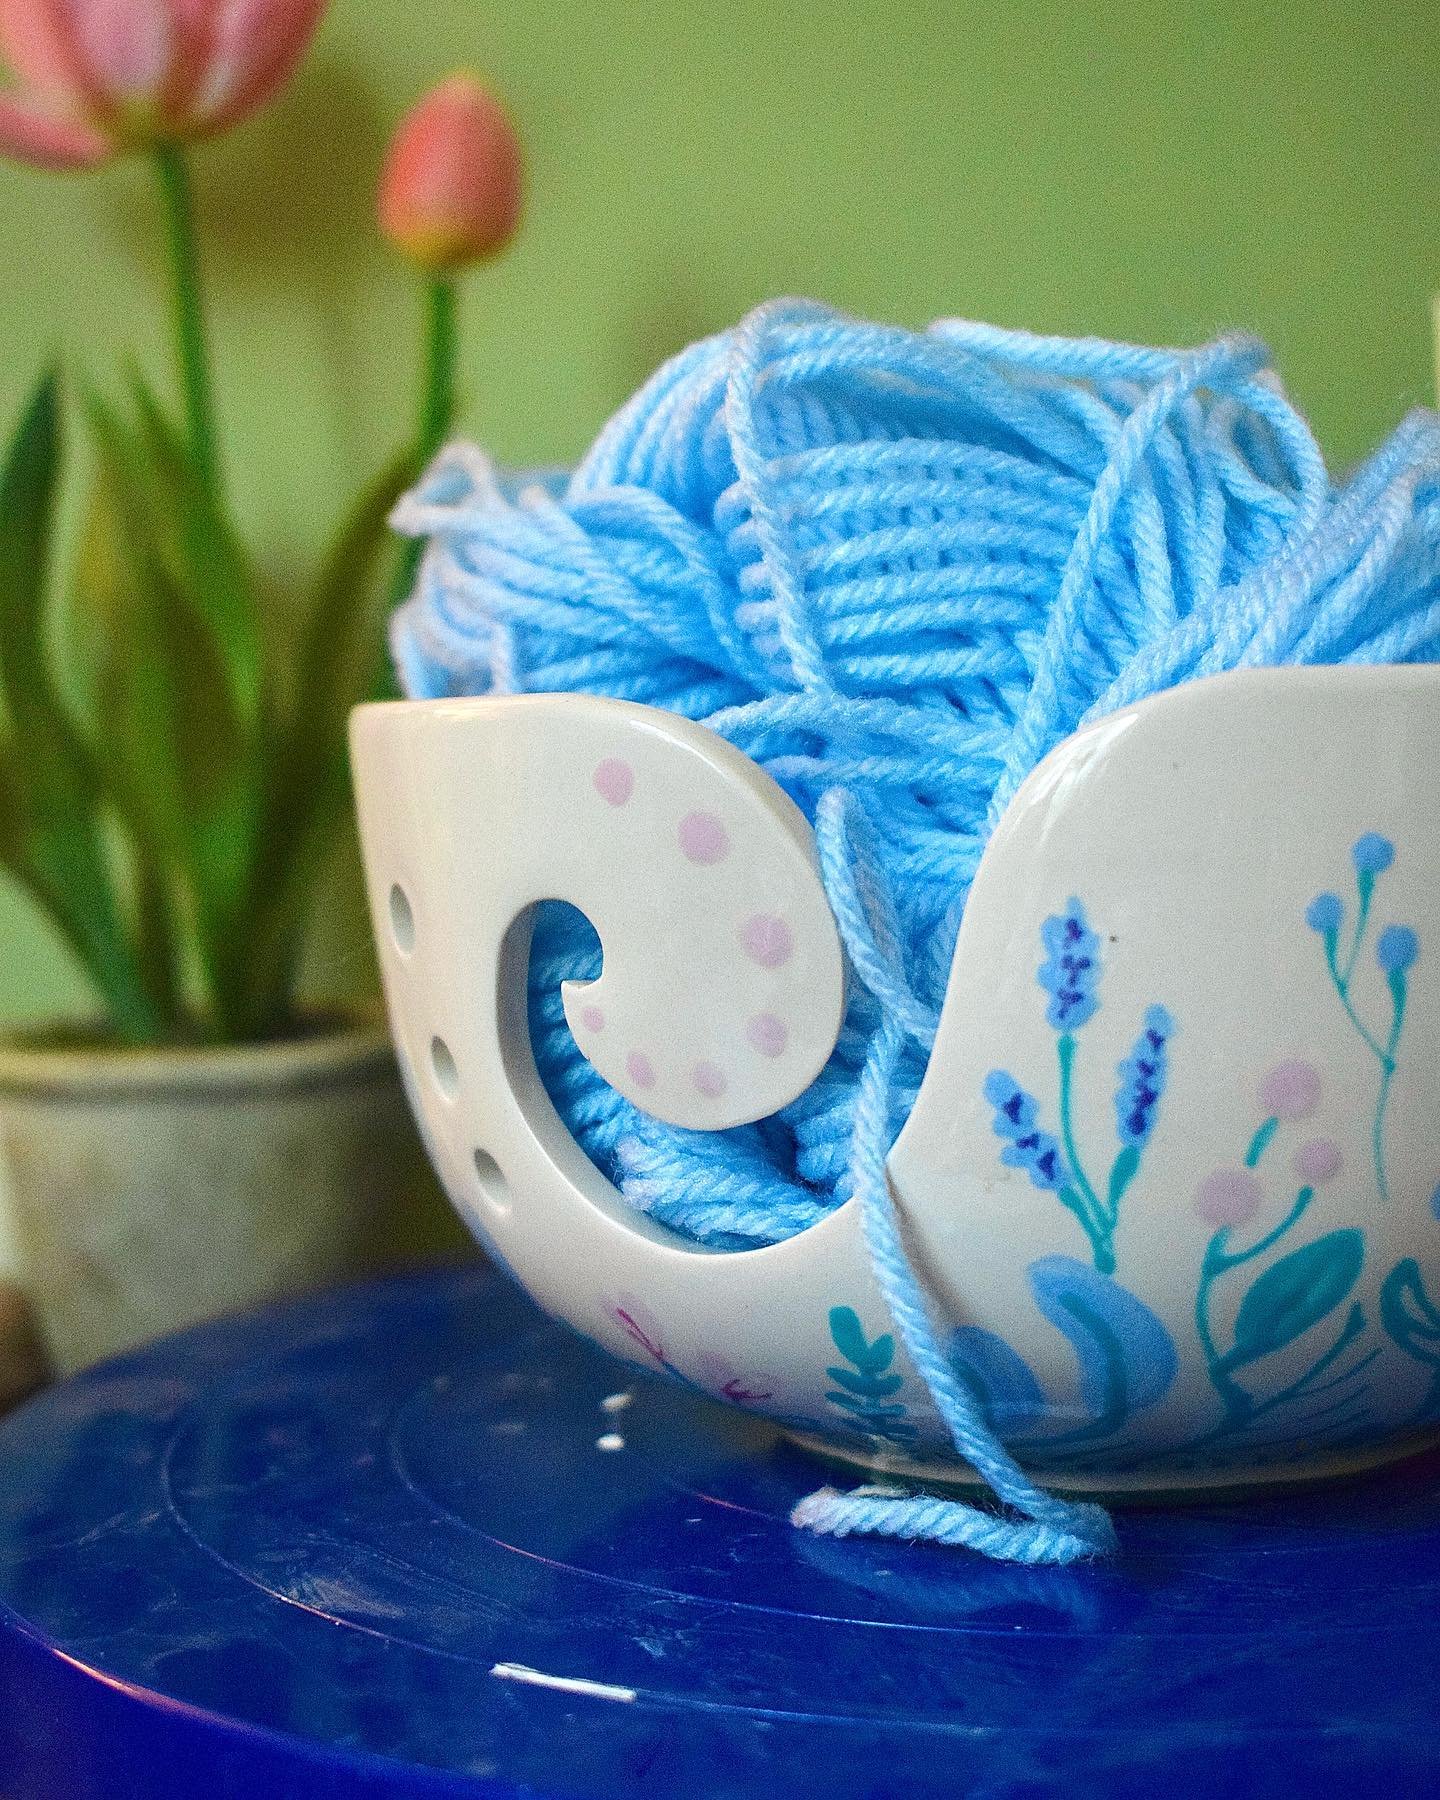 For my 25th birthday this year, I took my friends to paint some ceramics with me, and I just love how my yarn bowl came out! I had thought about buying/making a yarn bowl for a long time to assist me with my crocheting, but did not currently have acc